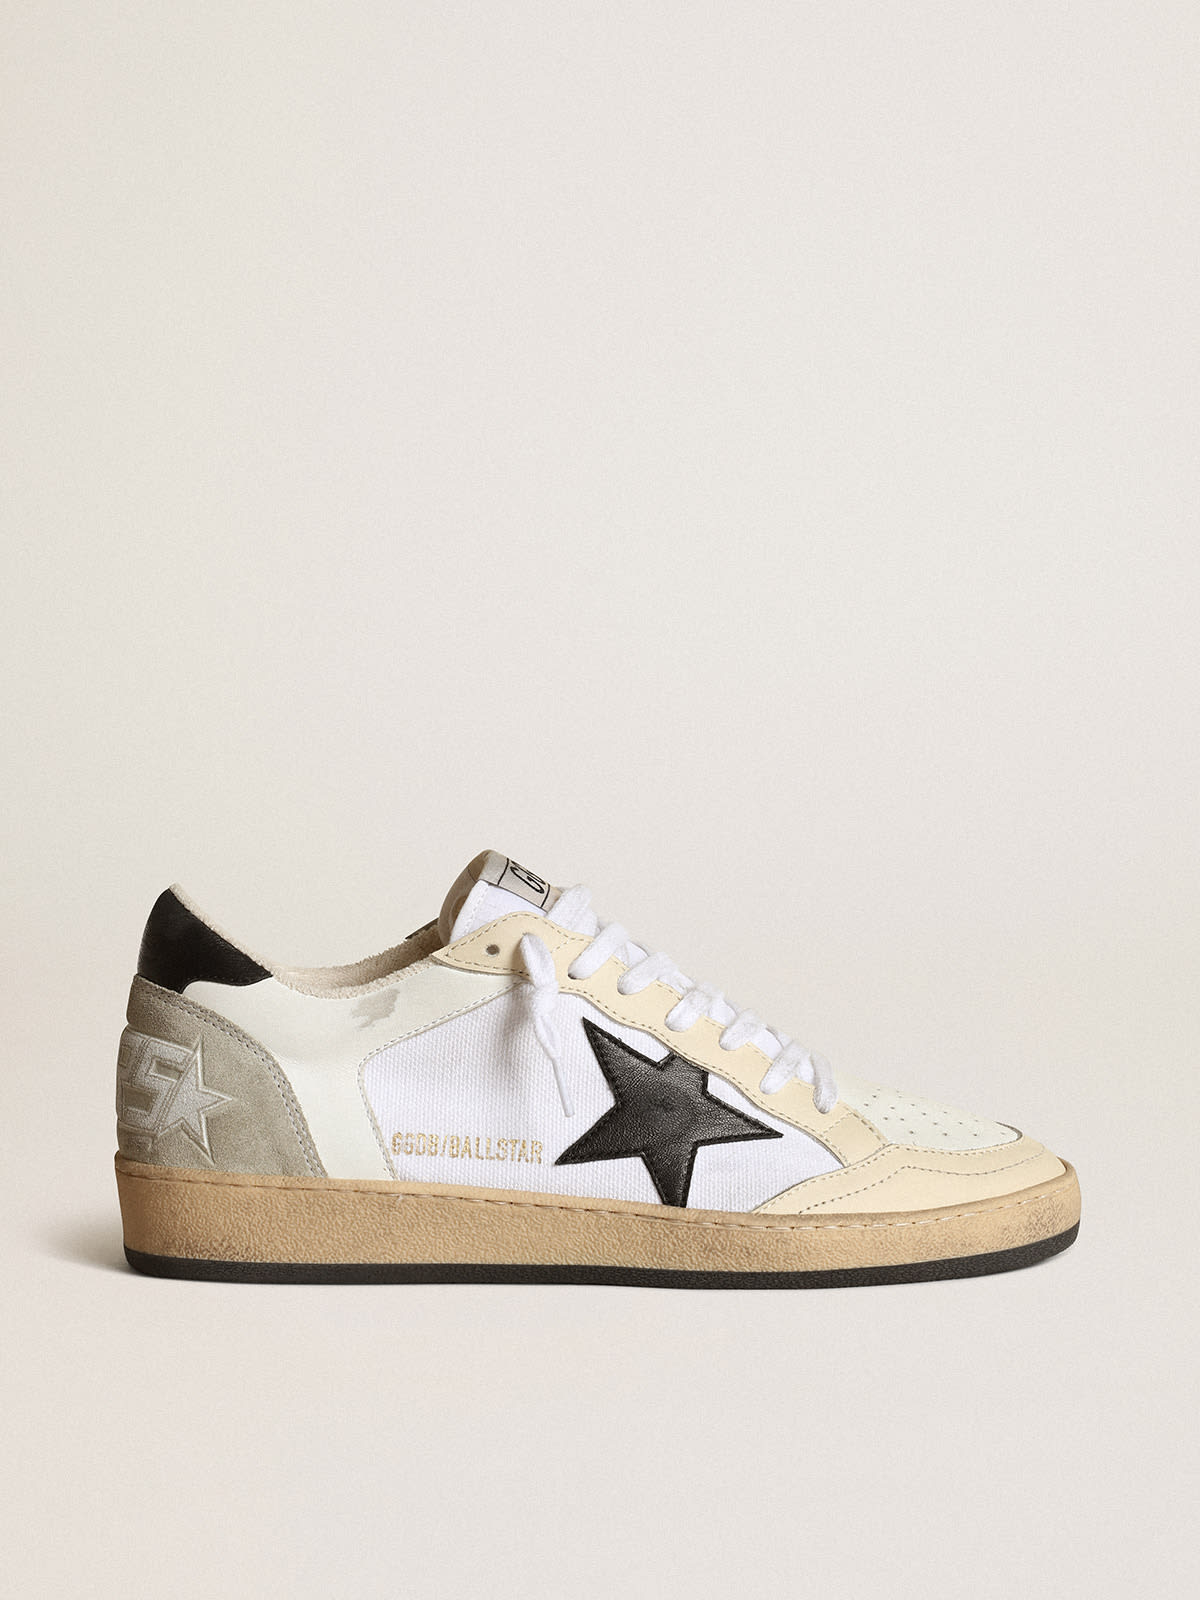 Golden Goose - Women’s Ball Star sneakers in white canvas and leather with ivory leather inserts and black nappa leather star in 